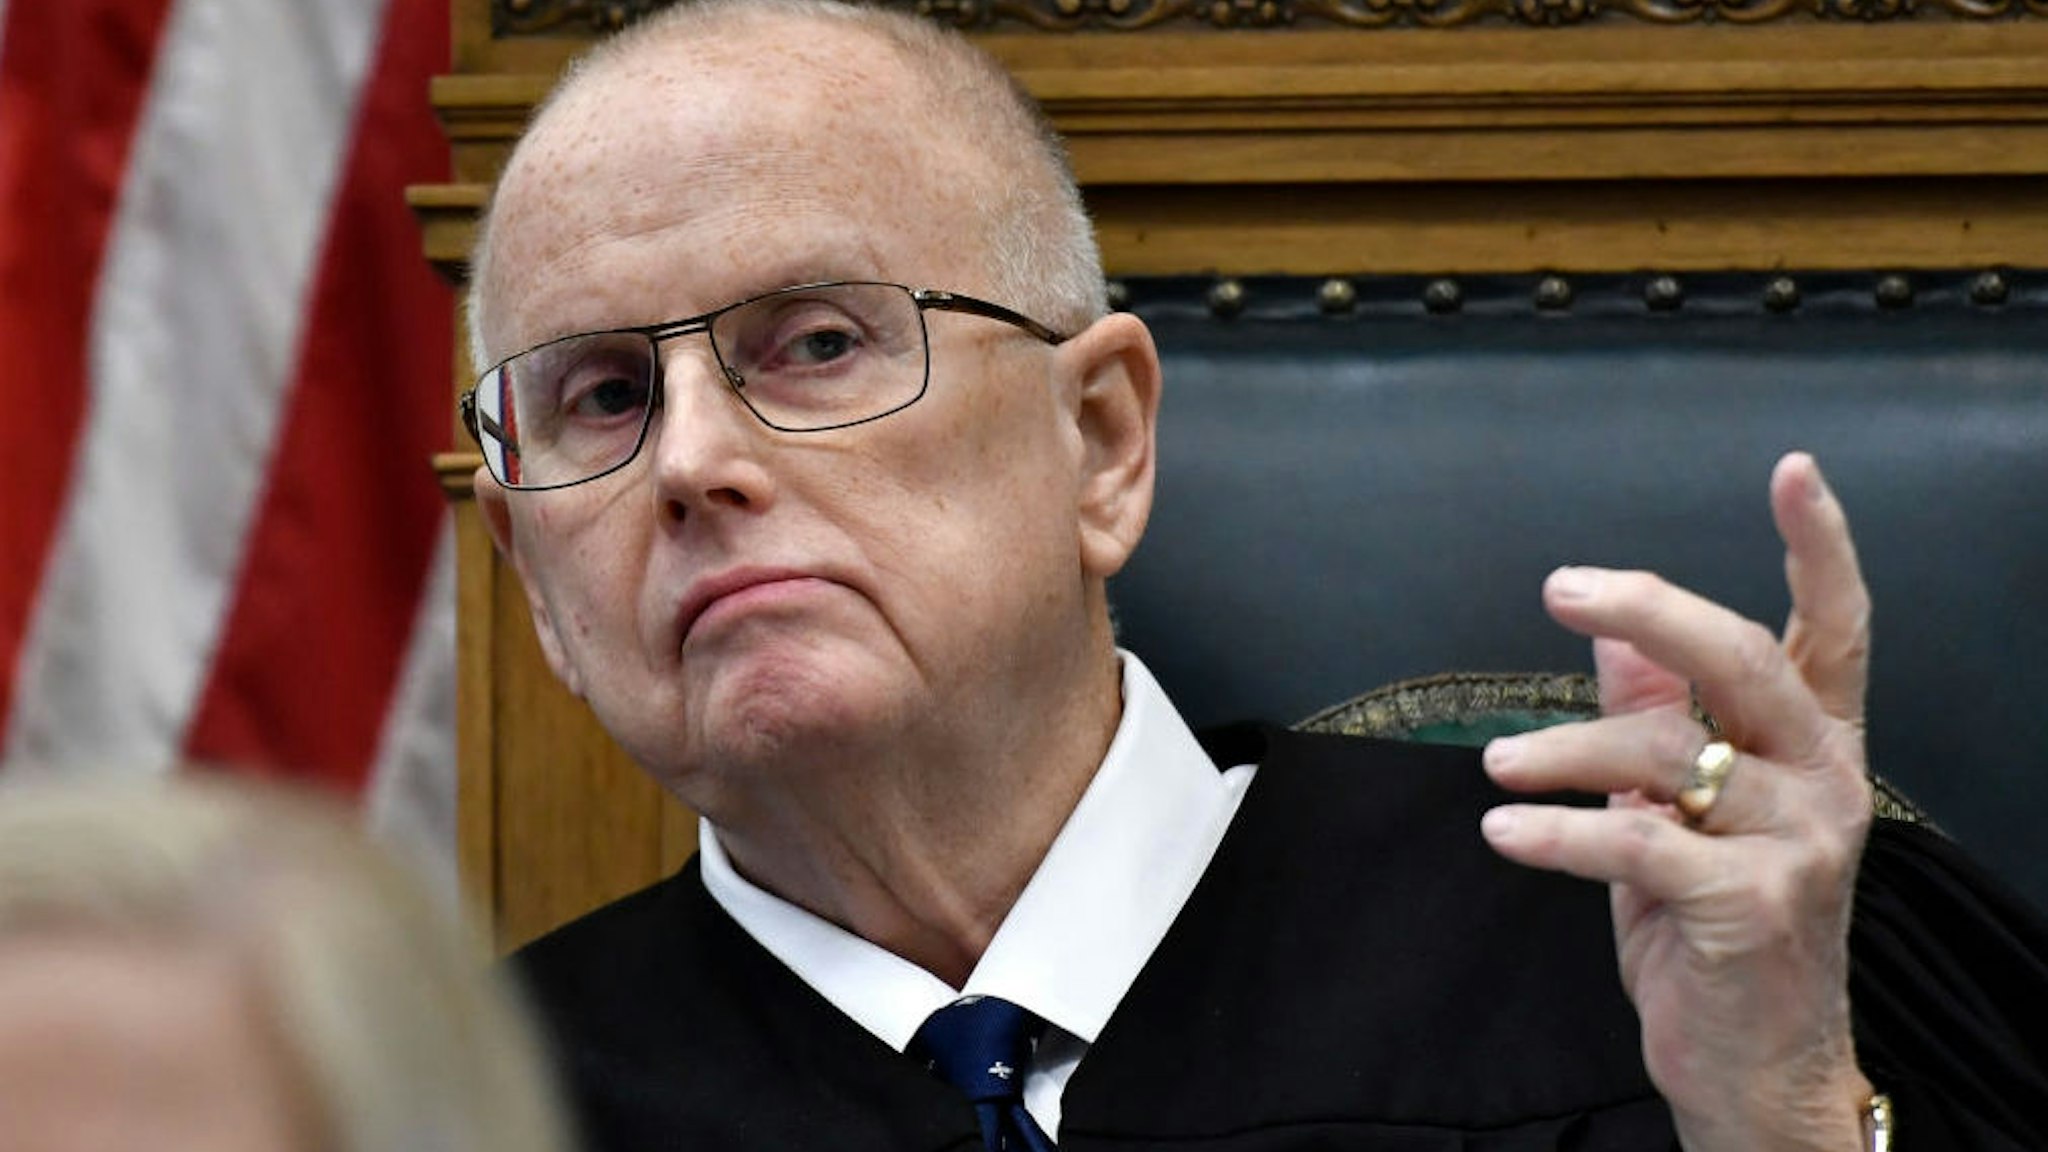 Judge Bruce Schroeder speaks to issues on jury instruction during Kyle Rittenhouse's trial at the Kenosha County Courthouse on November 15, 2021 in Kenosha, Wisconsin.